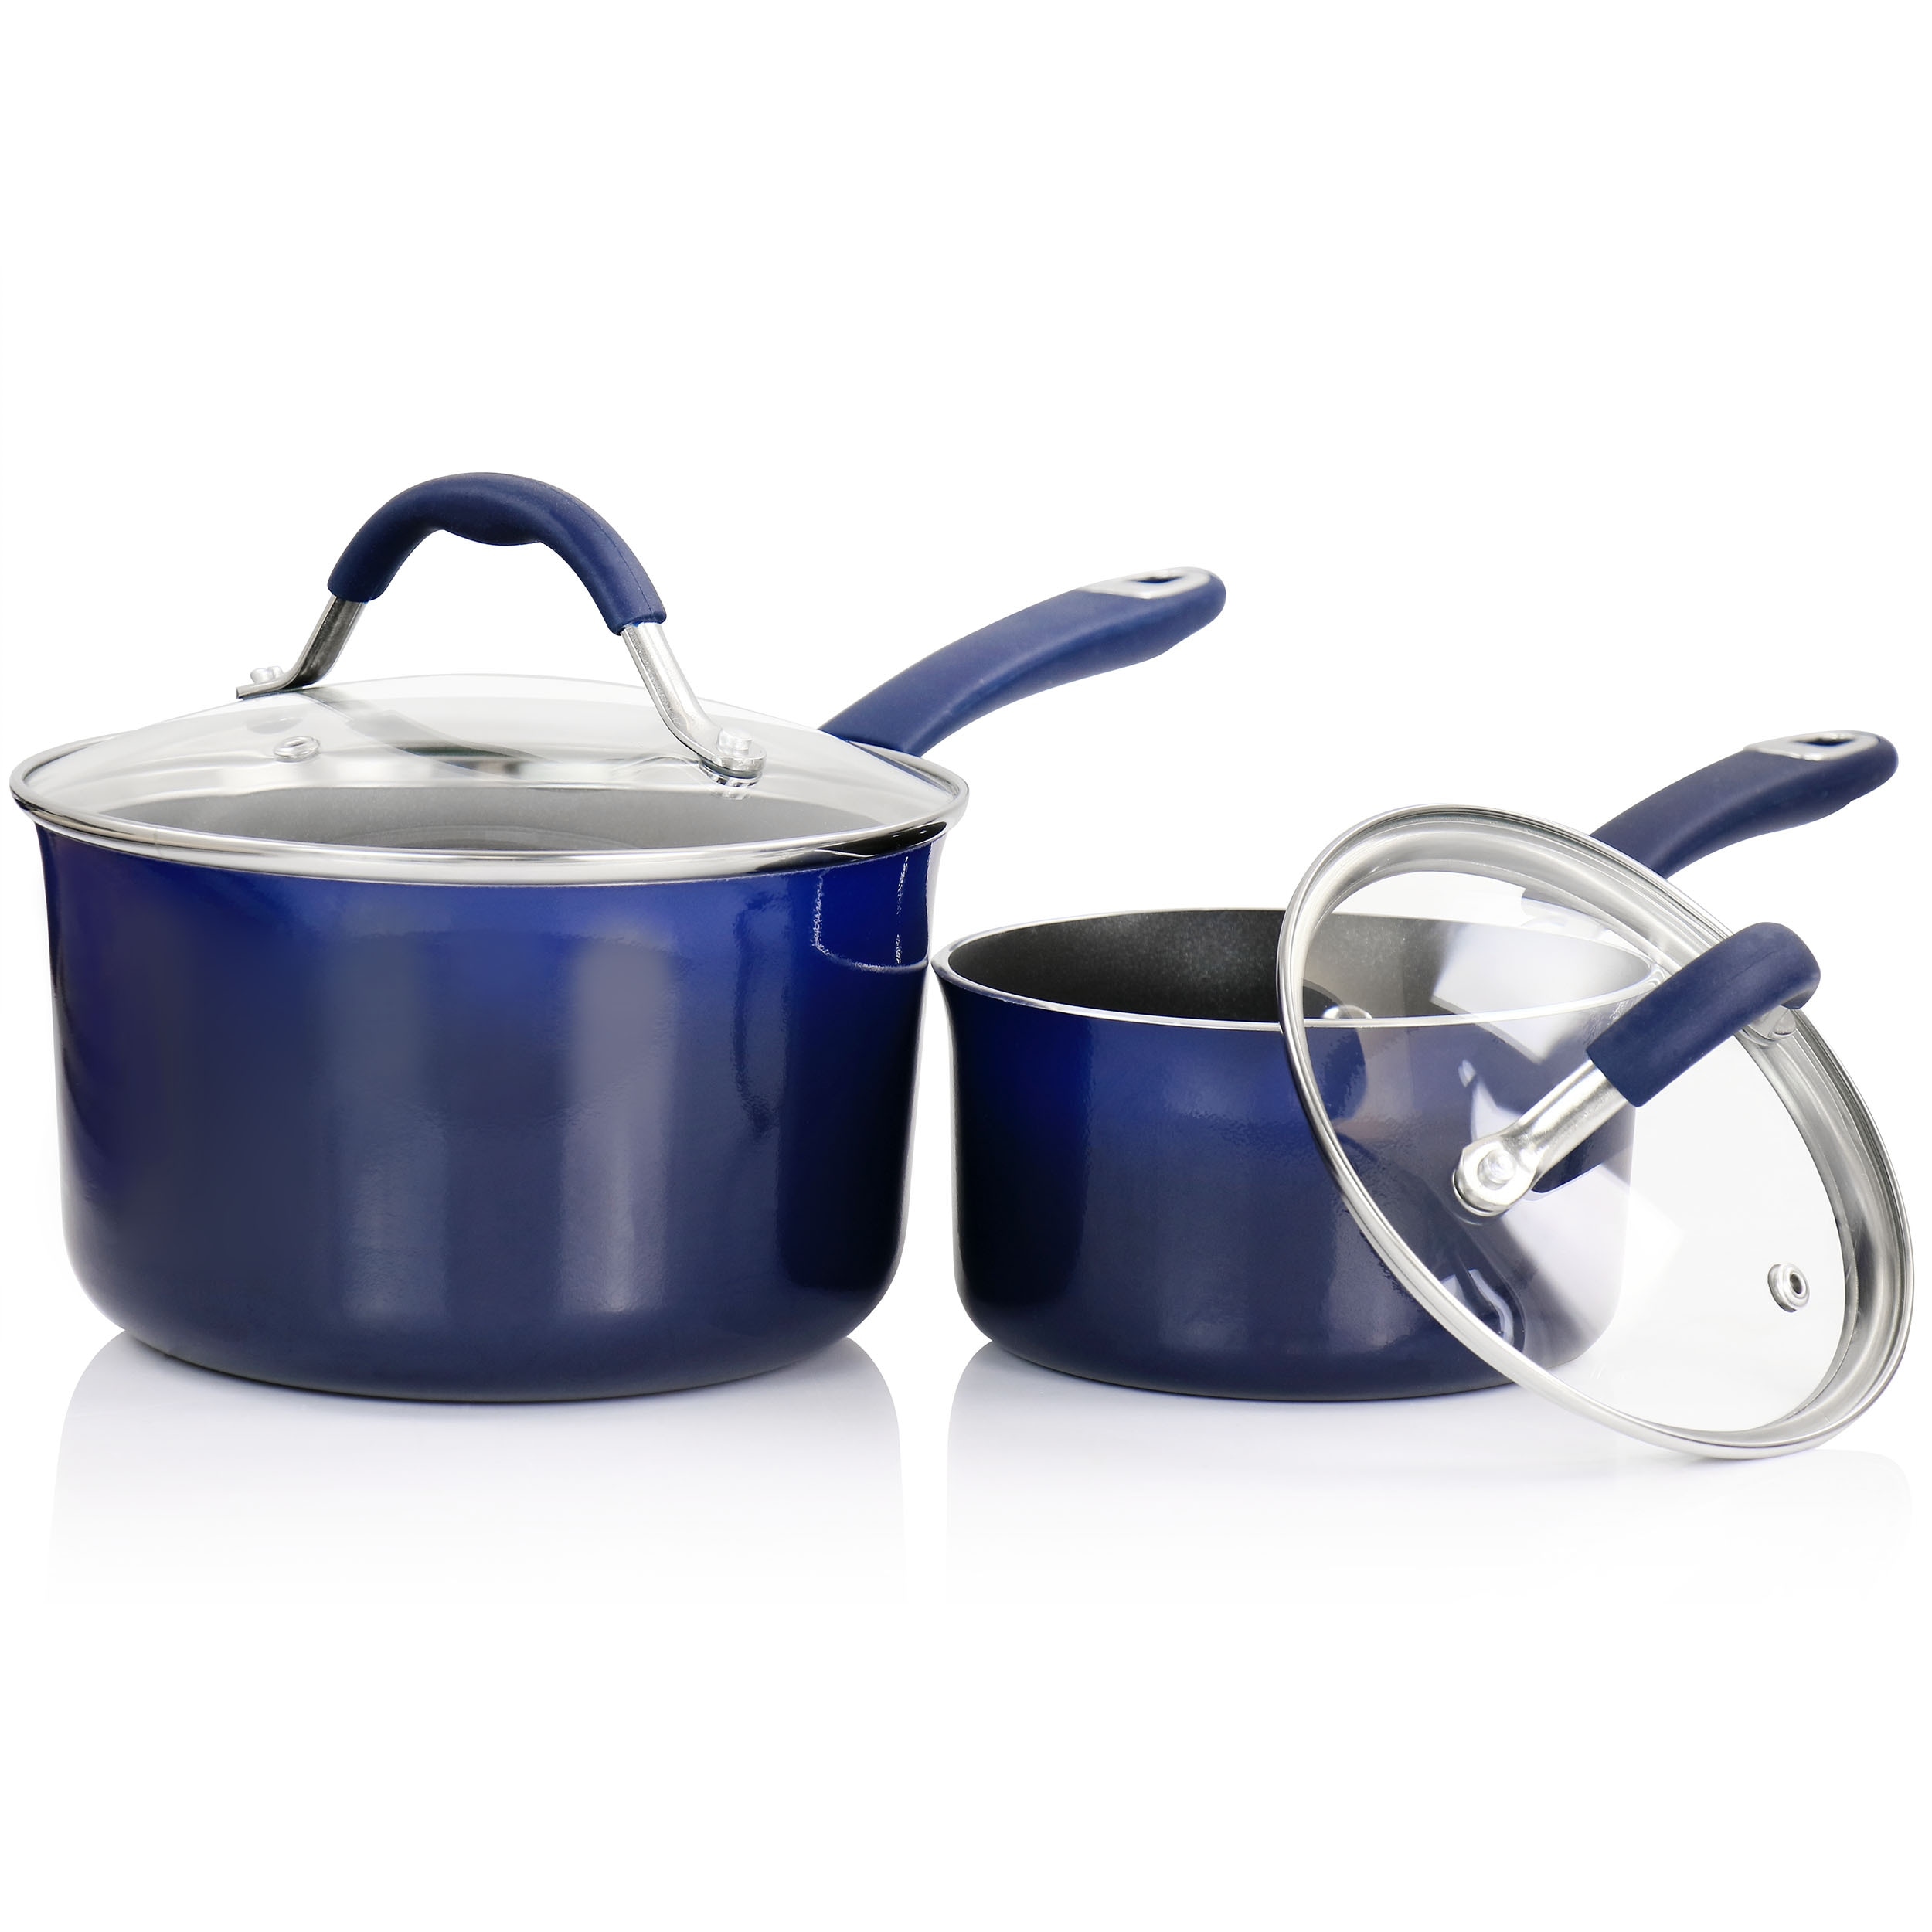 https://ak1.ostkcdn.com/images/products/is/images/direct/ef702246211b70359406869152272291eddfcc03/Cravings-by-Chrissy-Teigen-14Pc-Aluminum-Cookware-Combo-Set-in-Blue.jpg